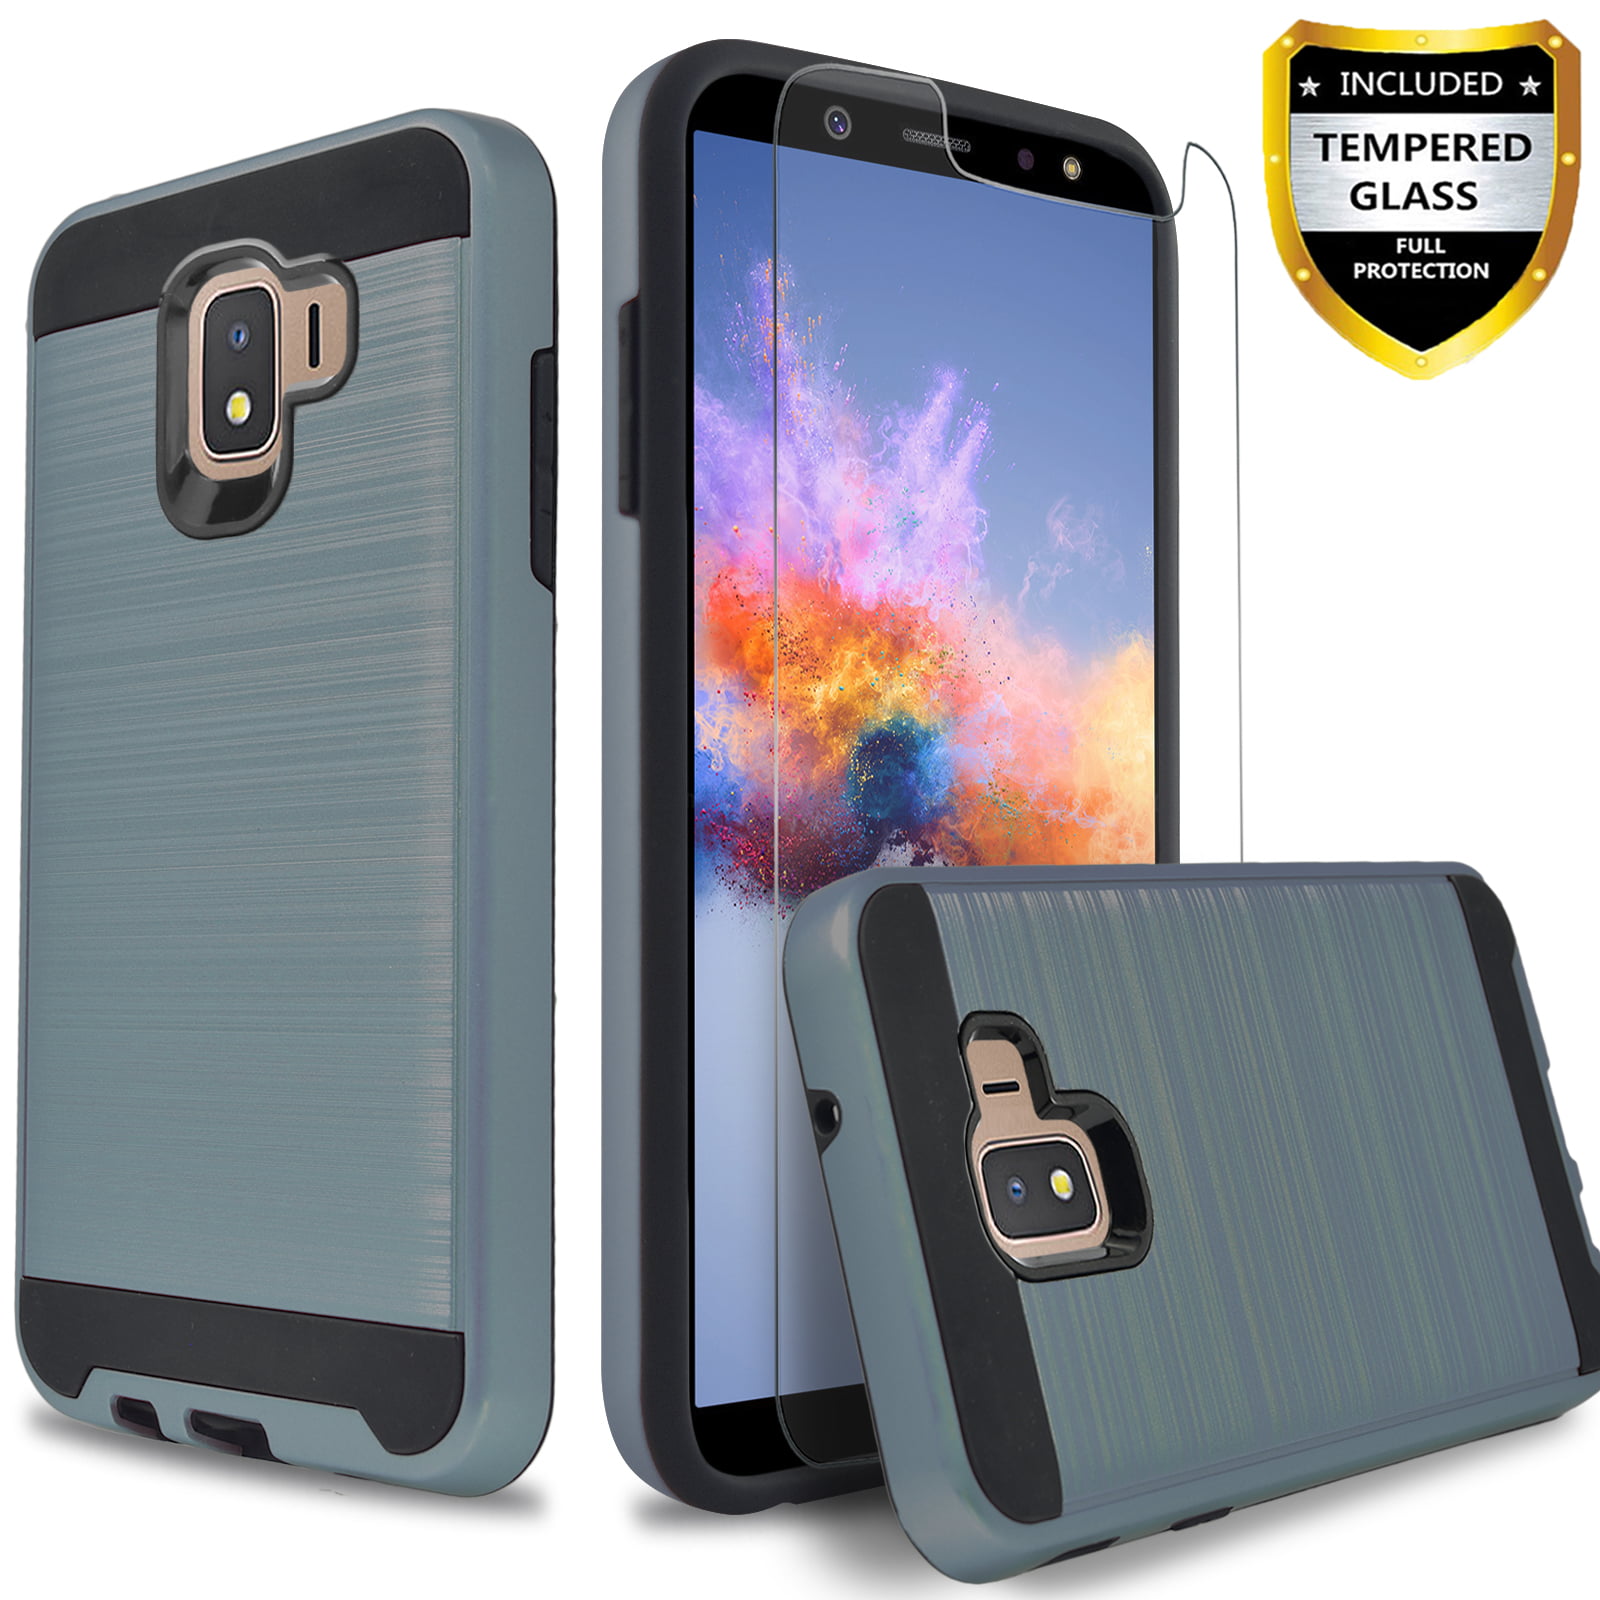 Kwelling beschermen Overeenstemming Samsung Galaxy J2 Shine /Pure/Dash/Core Phone Case, 2-Piece Style Hybrid  Shockproof Hard Case Cover with [Tempered Glass Screen Protector] And  Circlemalls Stylus Pen [Black] - Walmart.com